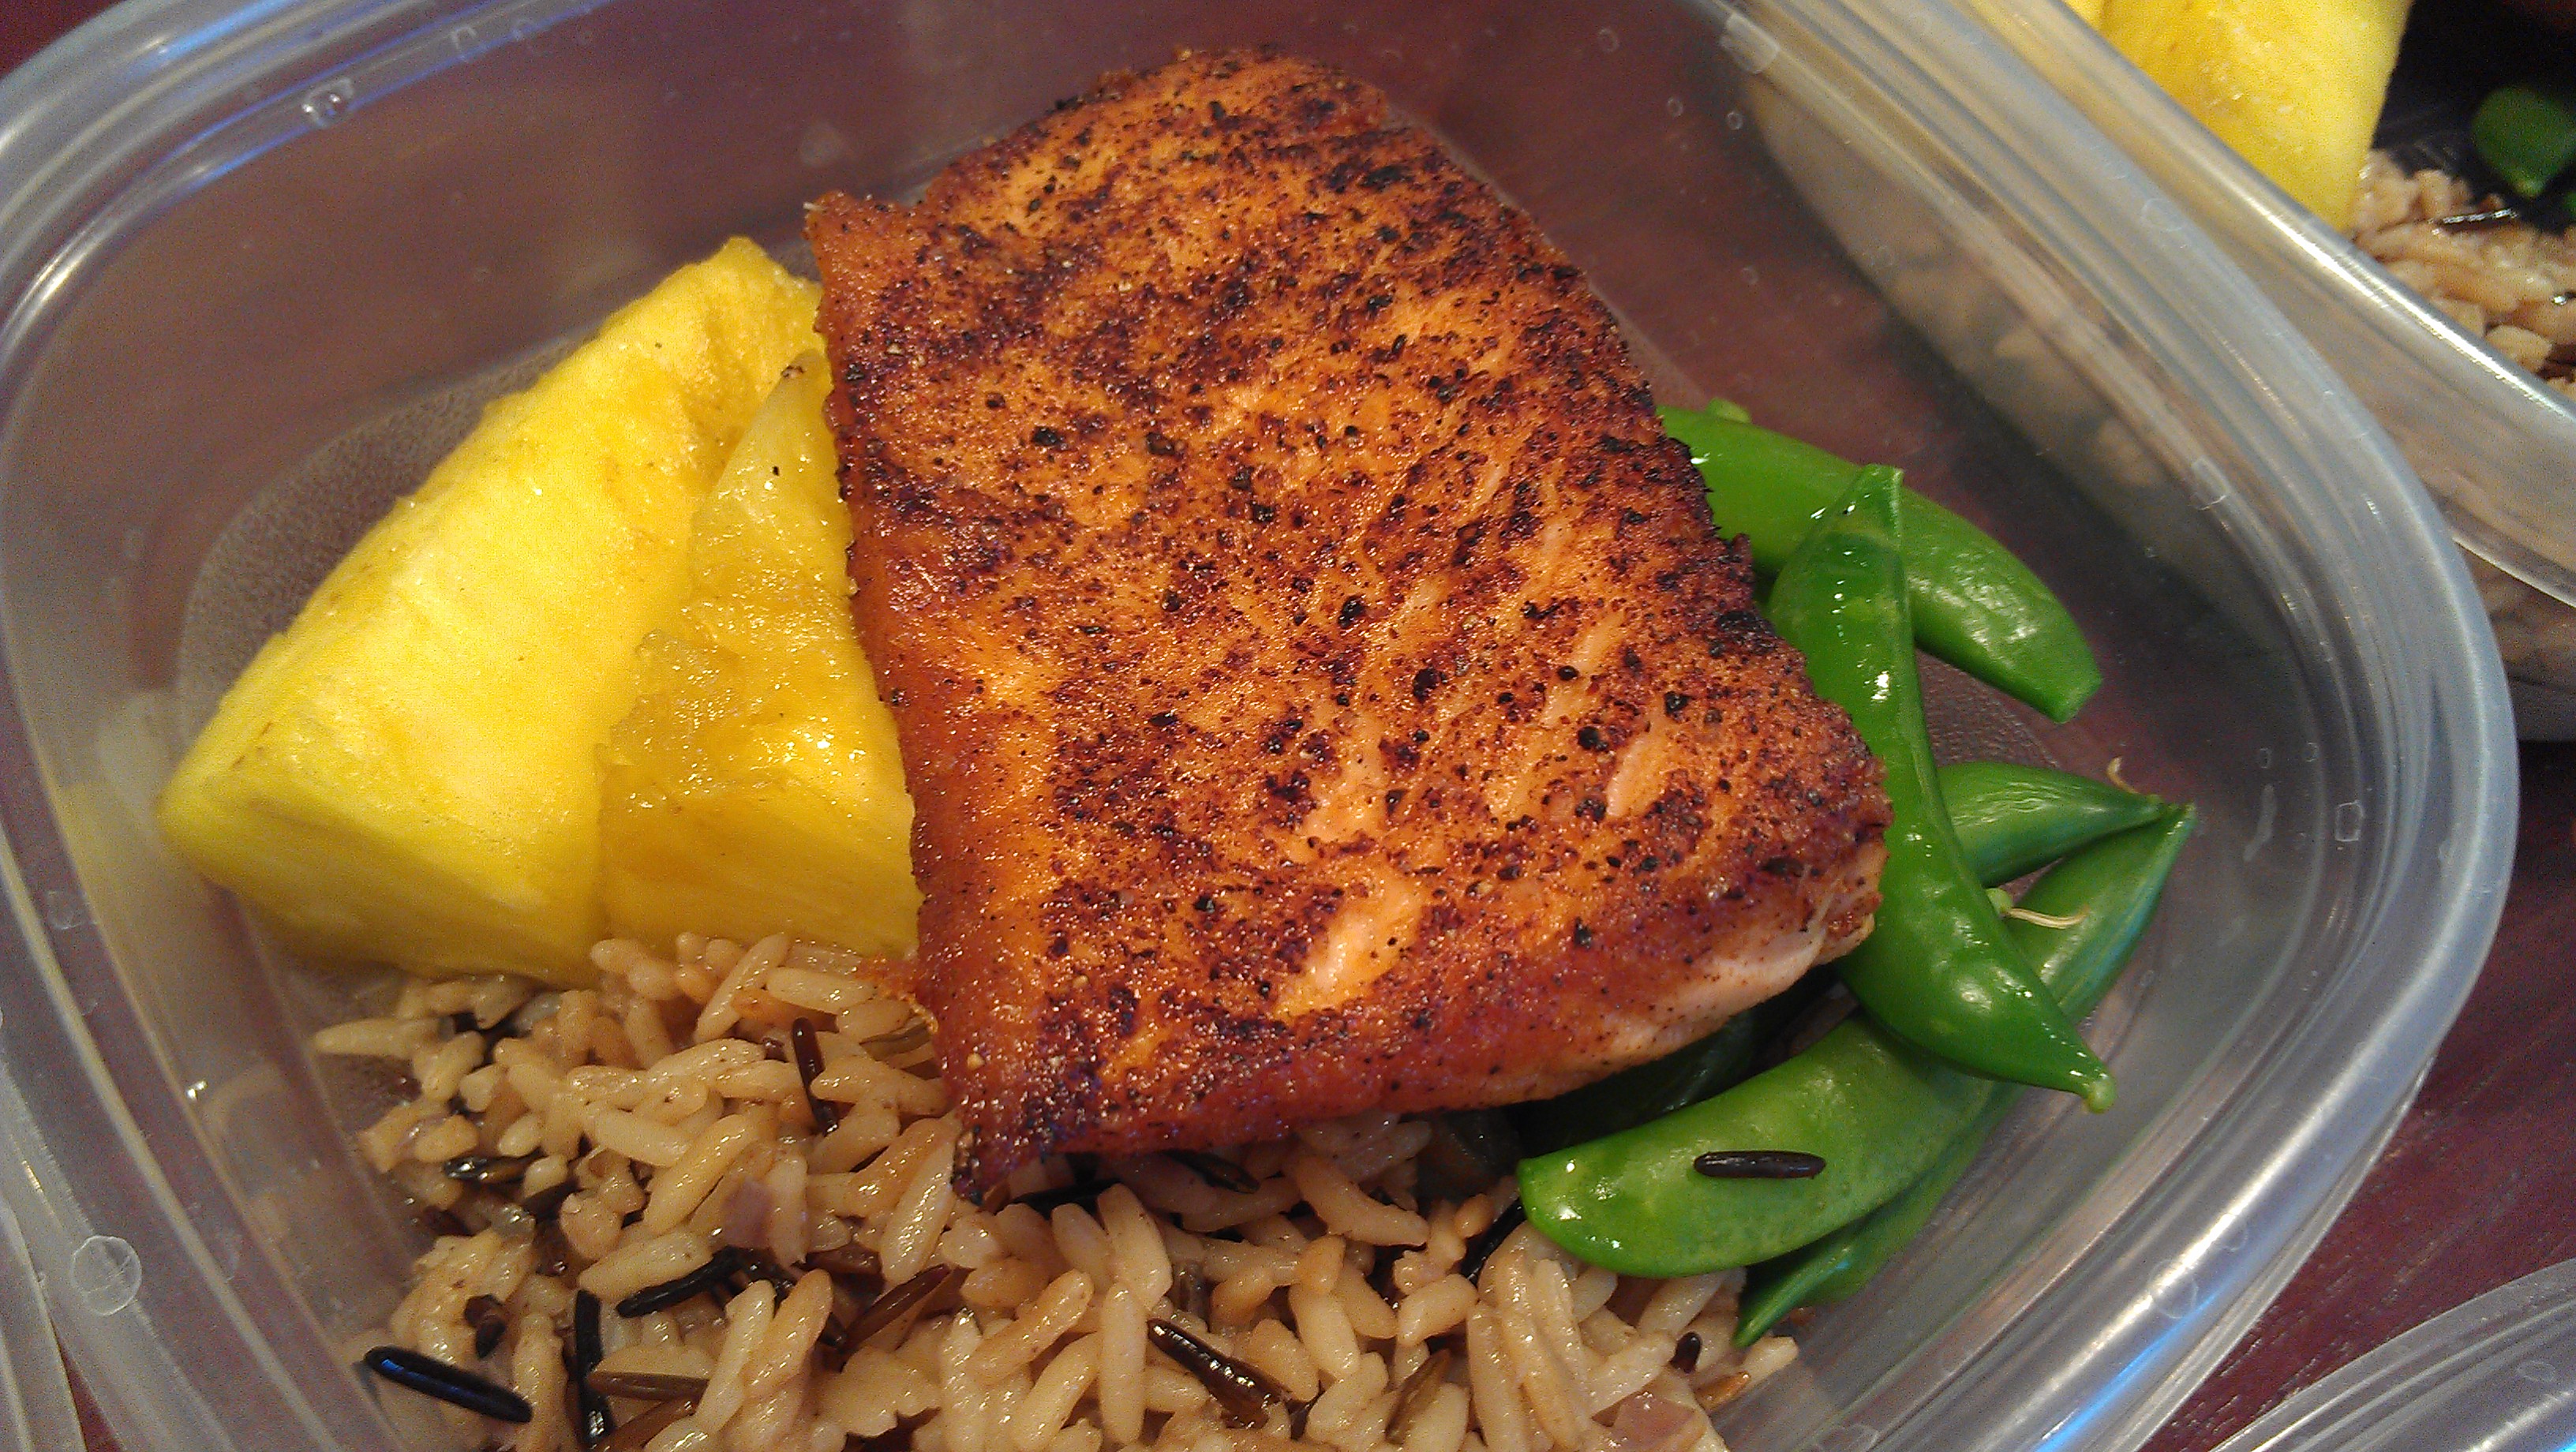 Salmon and glazed pineapple pic